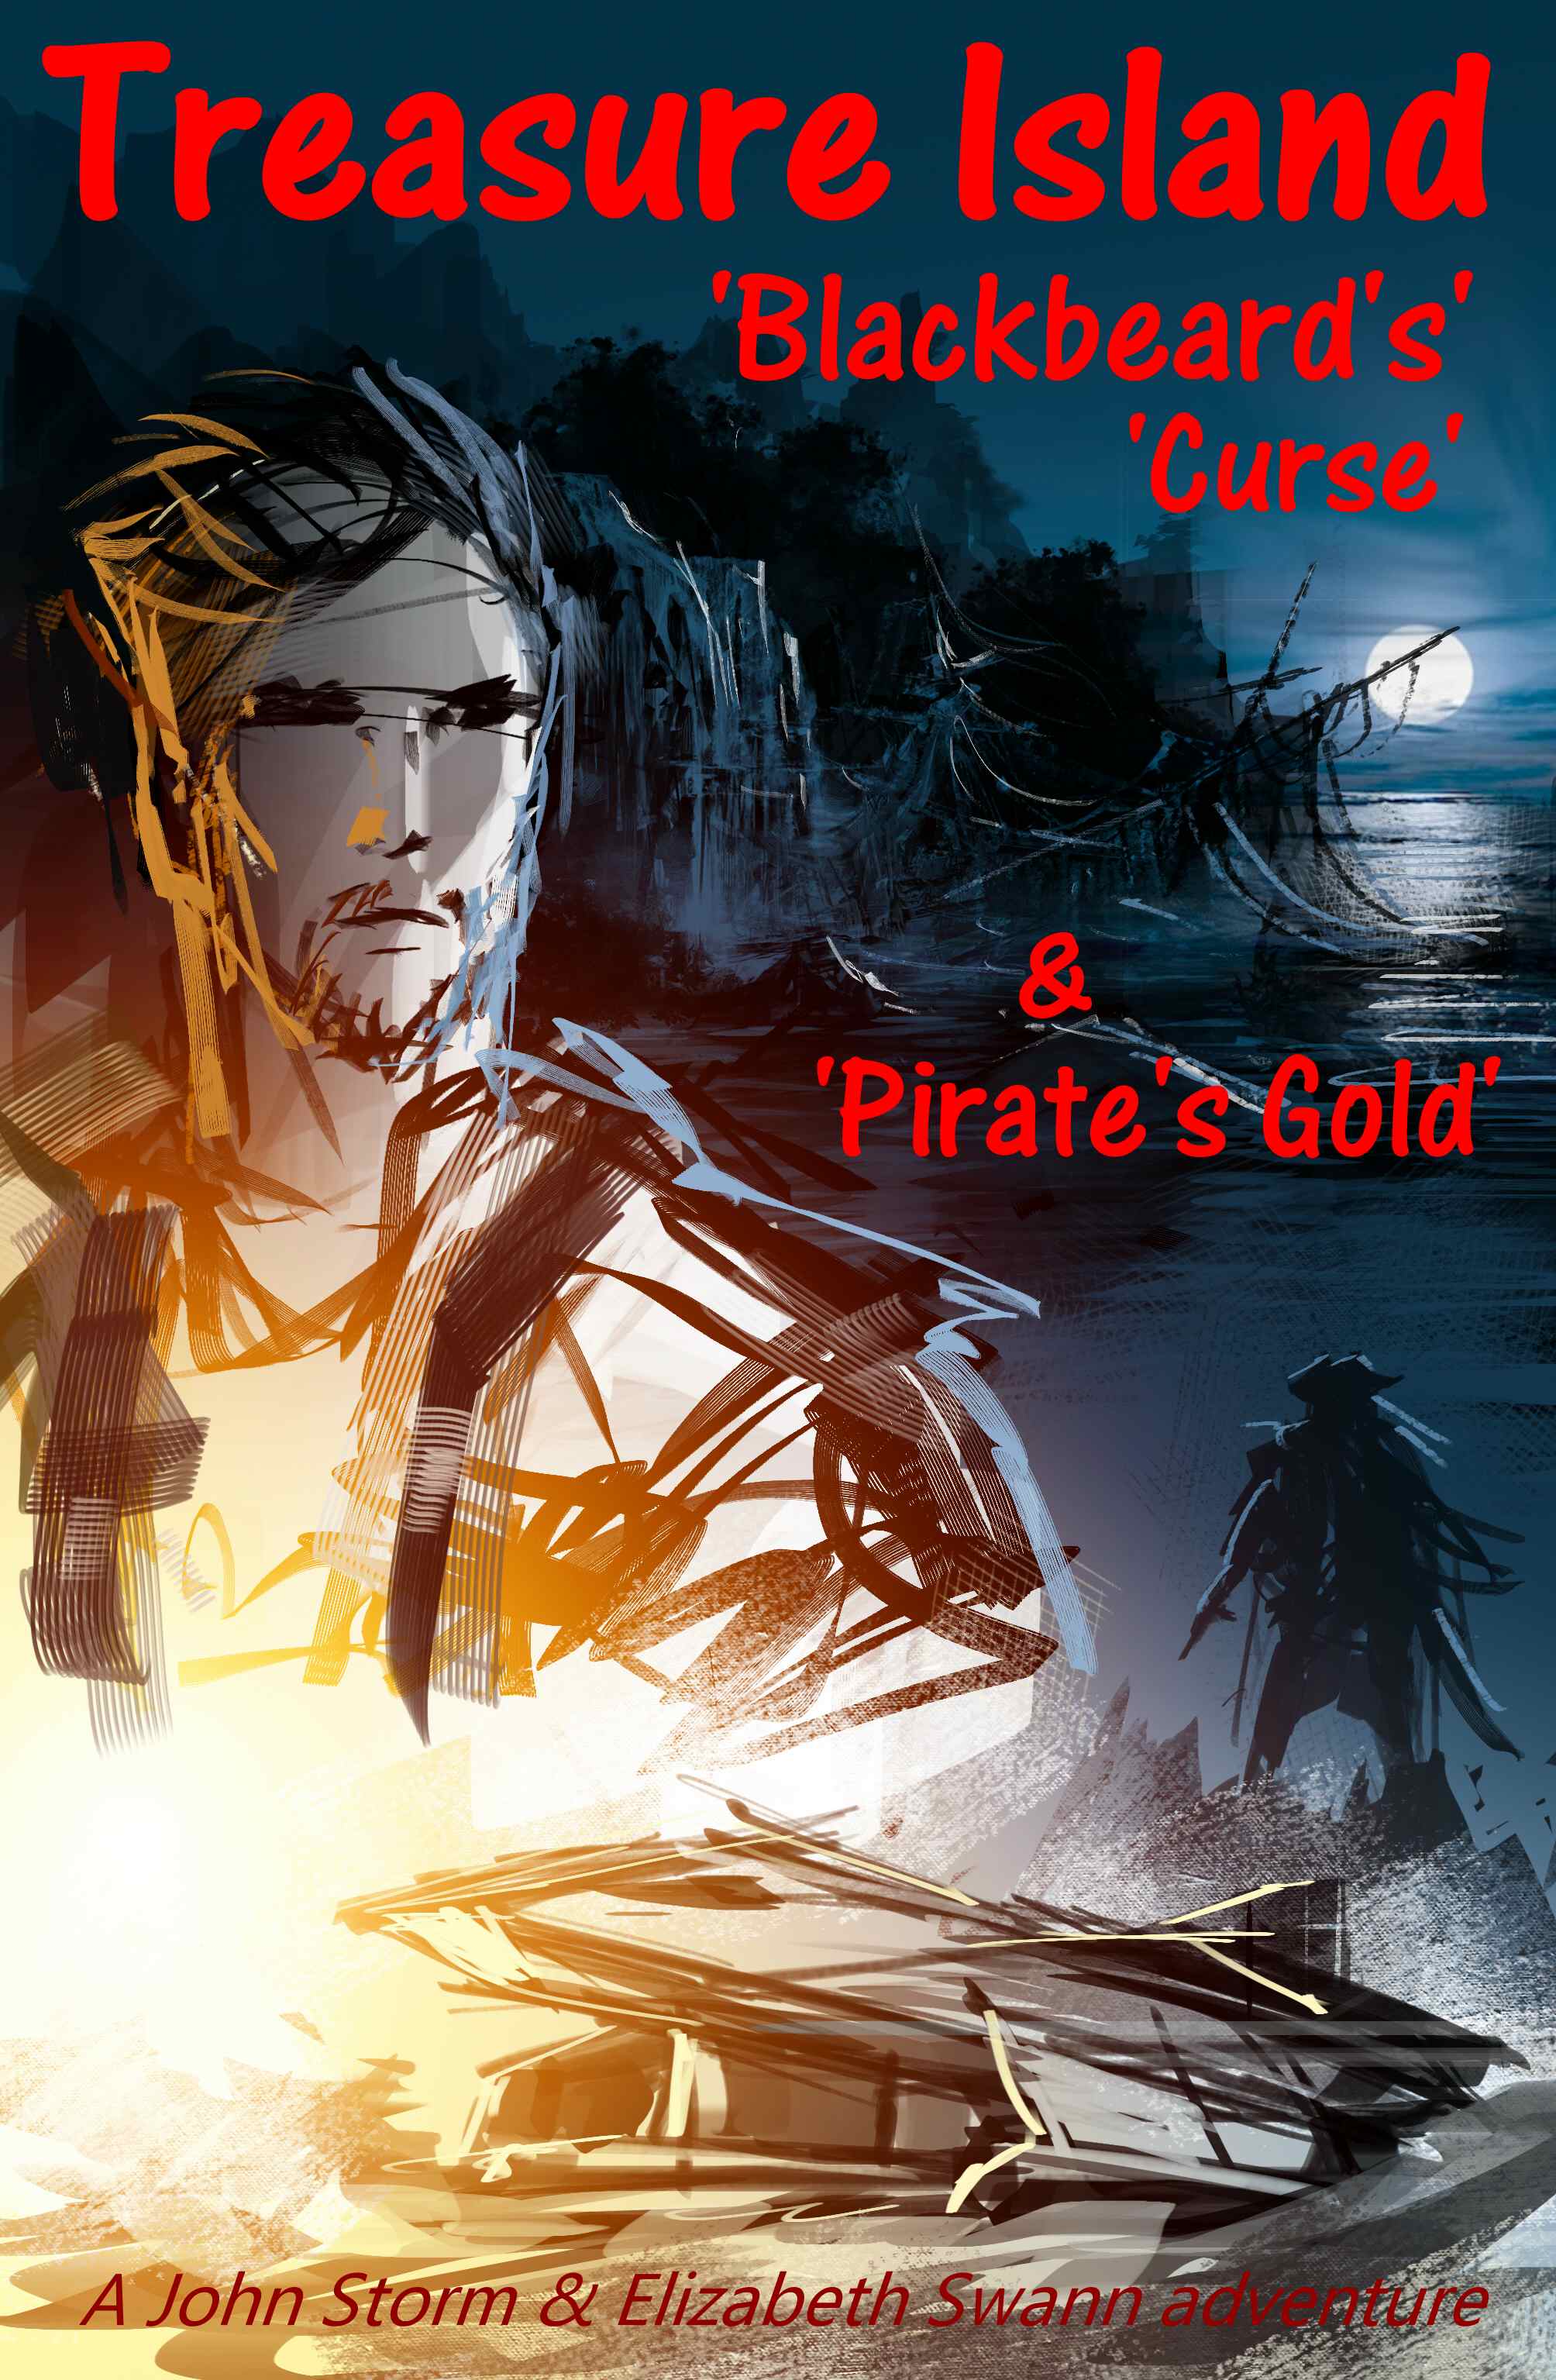 Draft artwork, featuring John Storm and the Elizabeth Swann, in the search for Blackbeard's pirate gold